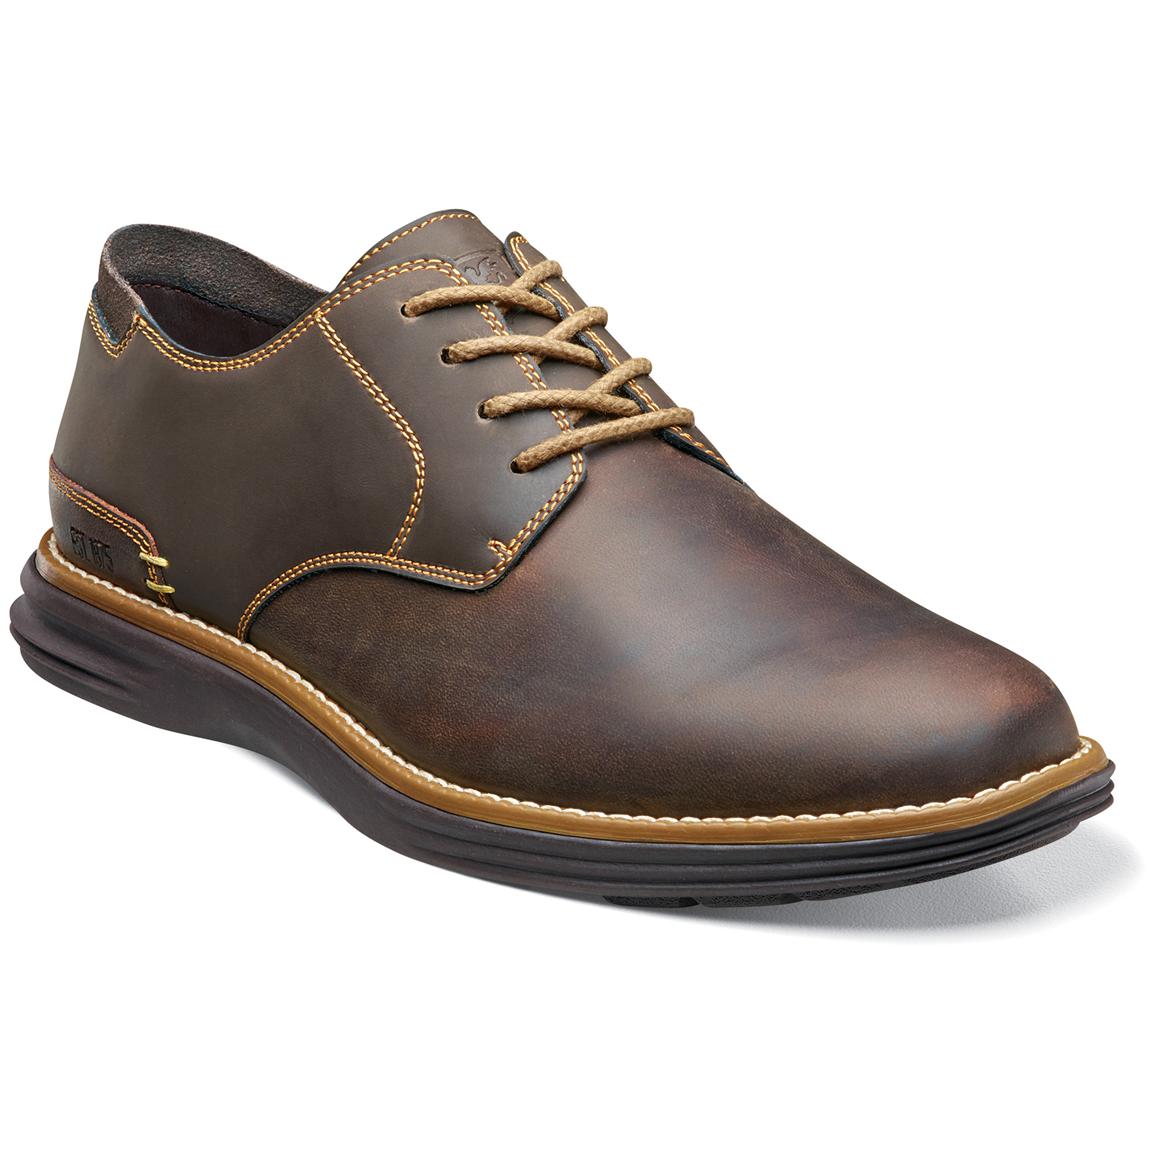 Men's Stacy Adams® Ashby Shoes - 582276, Casual Shoes at Sportsman's Guide